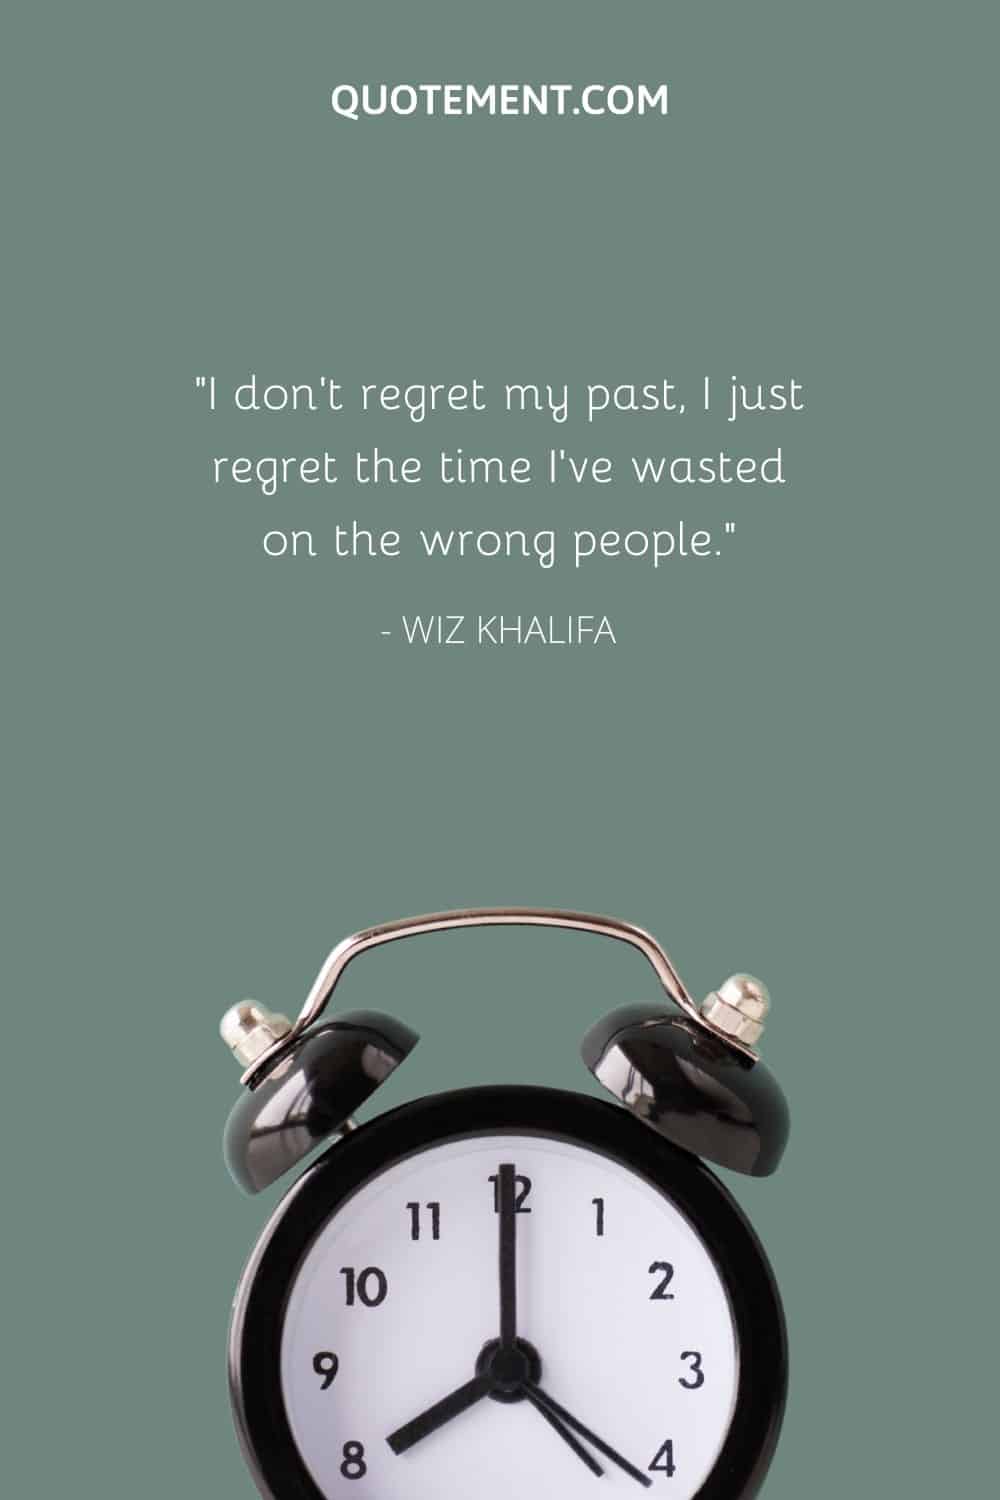 I don’t regret my past, I just regret the time I’ve wasted on the wrong people